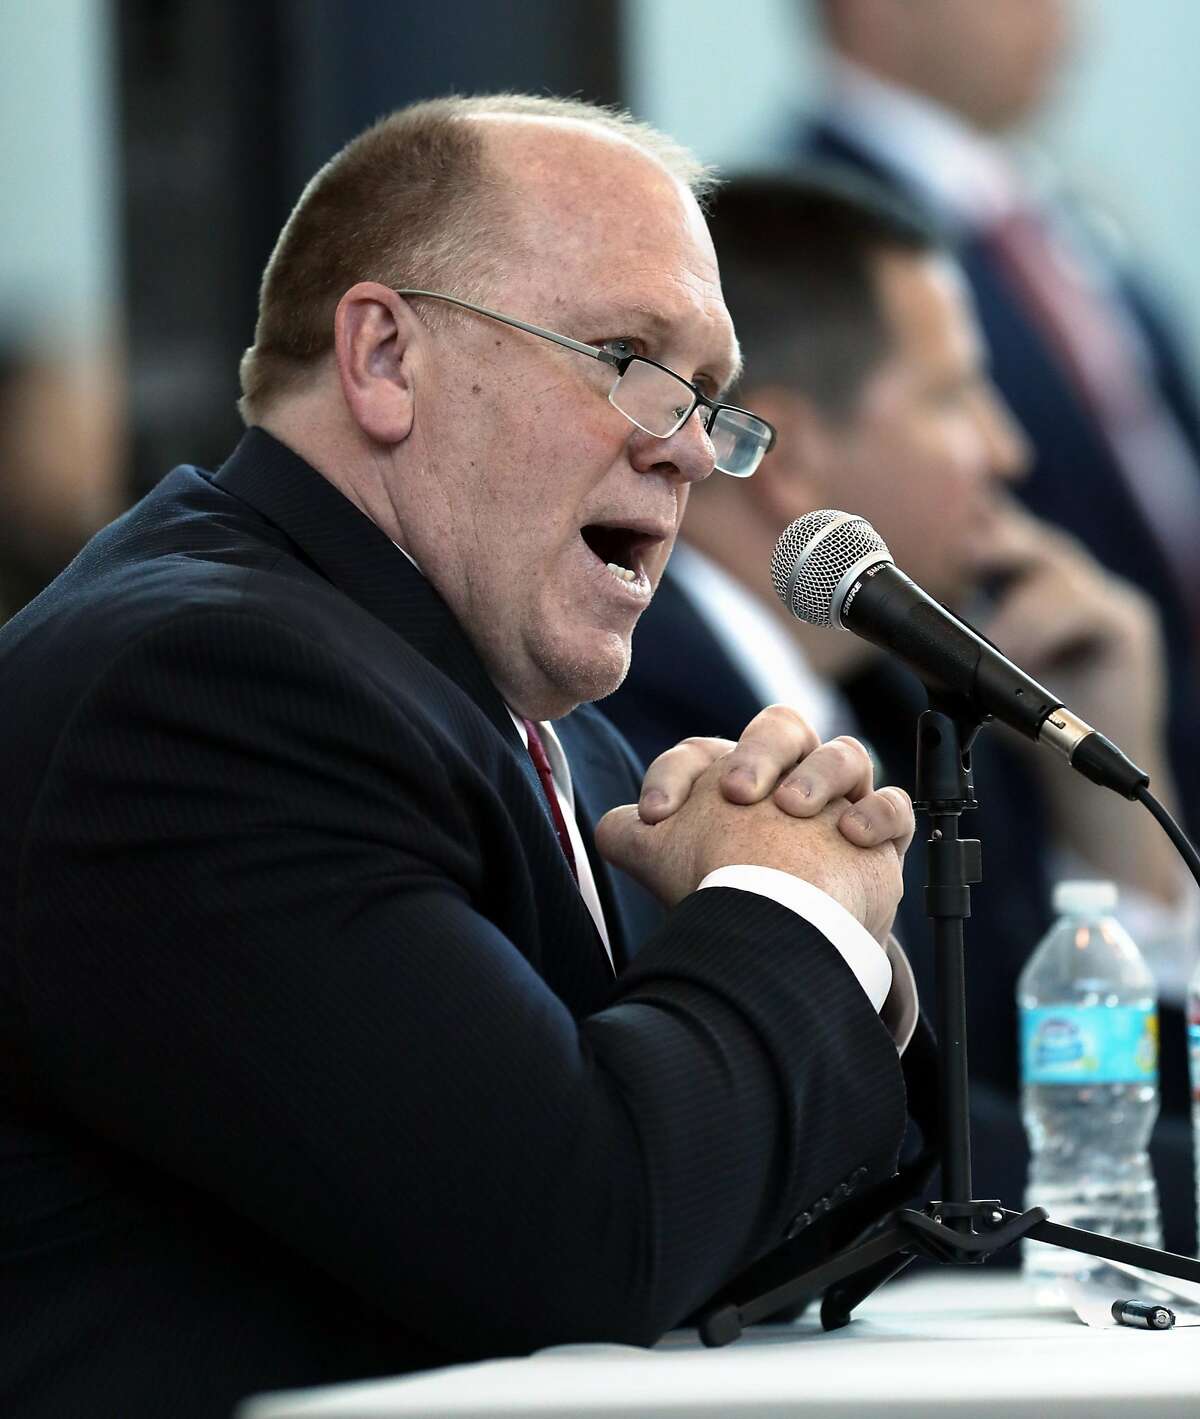 Acting ICE Director Thomas Homan speaks at a public forum in Sacramento on March 28, 2017.